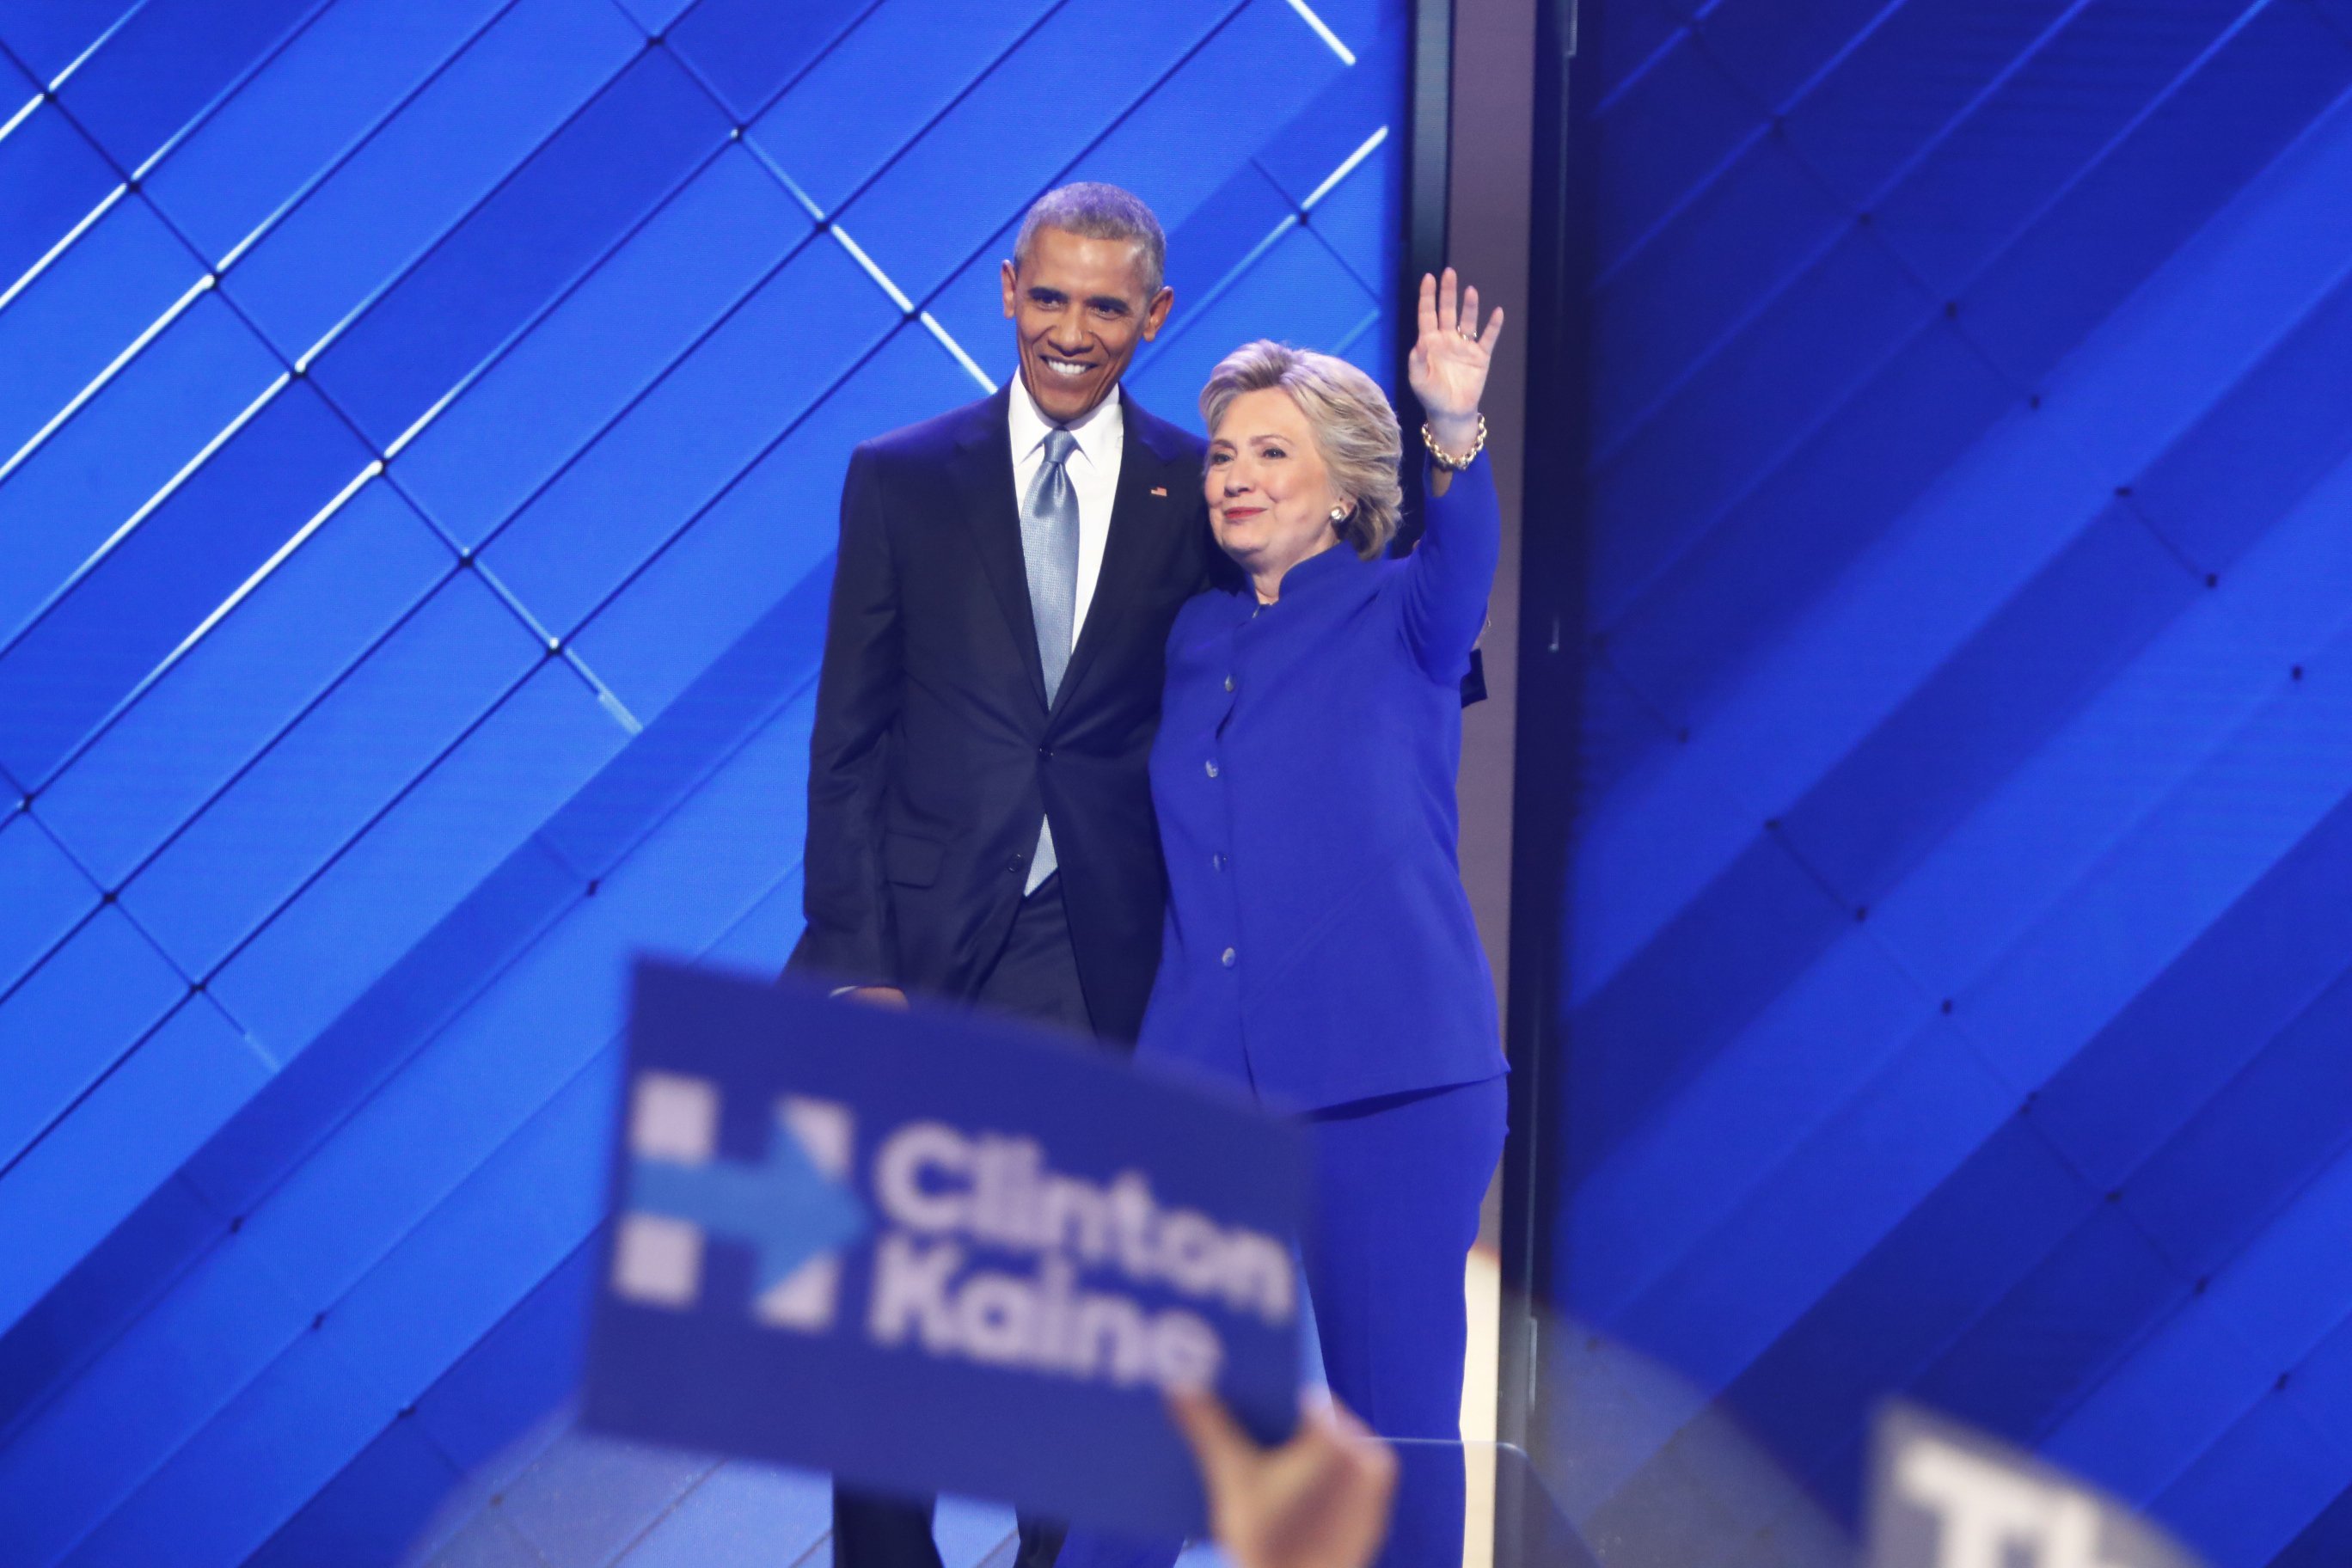 President Barack Obama stands with Hillary Clinton on the stage of 2016 Democratic National Convention.